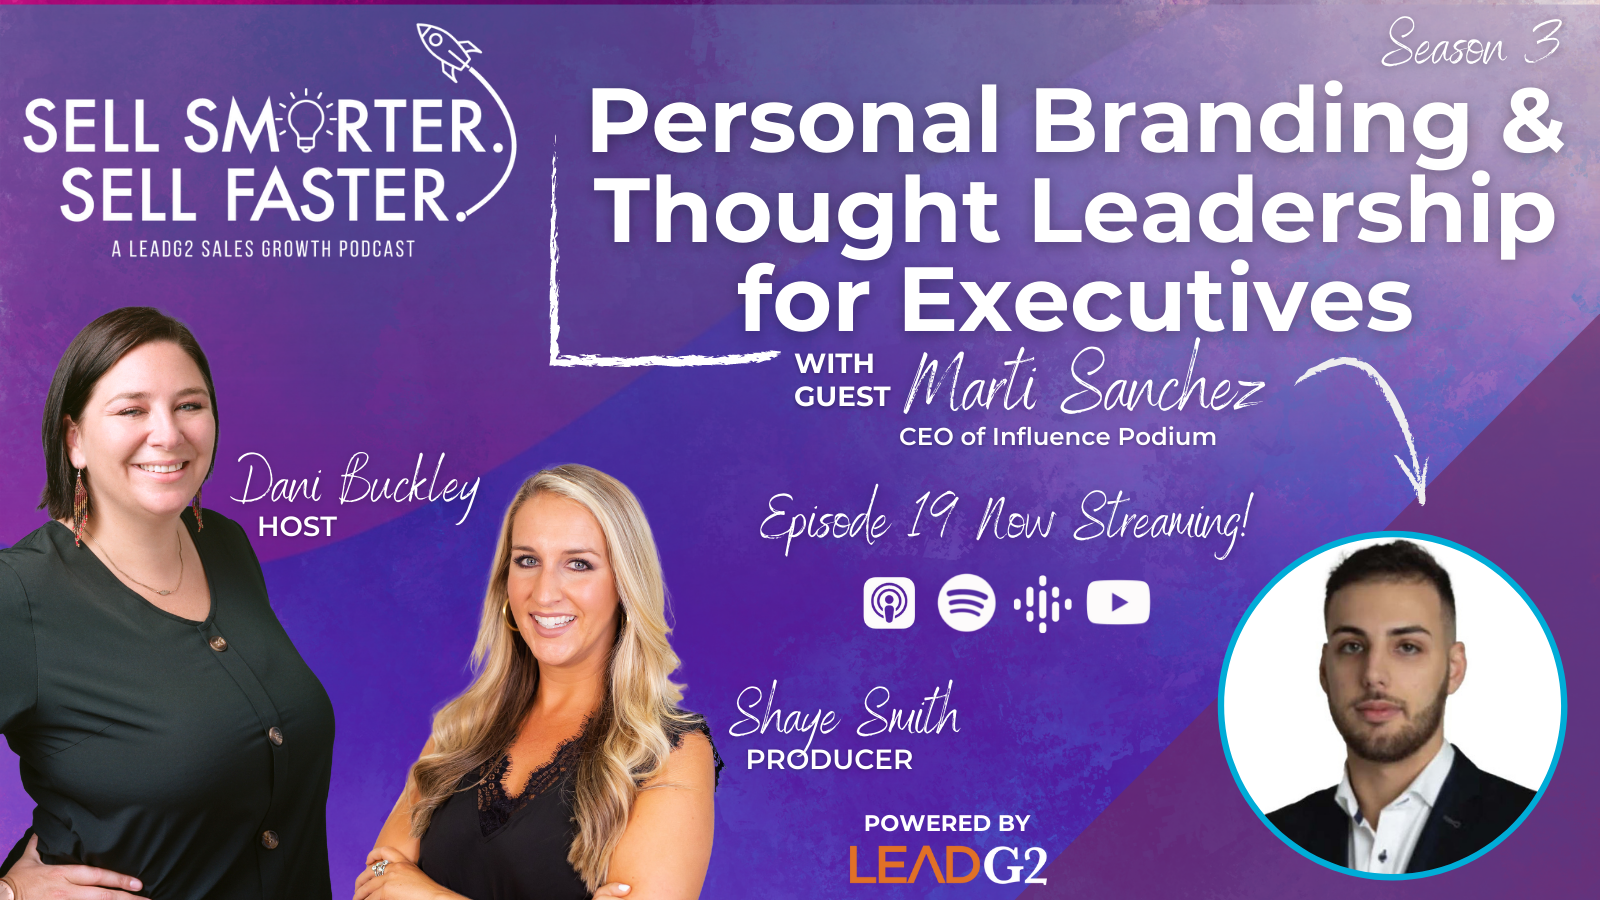 Personal Branding and Thought Leadership for Executives with Marti Sanchez | Sell Smarter. Sell Faster. Ep. 19